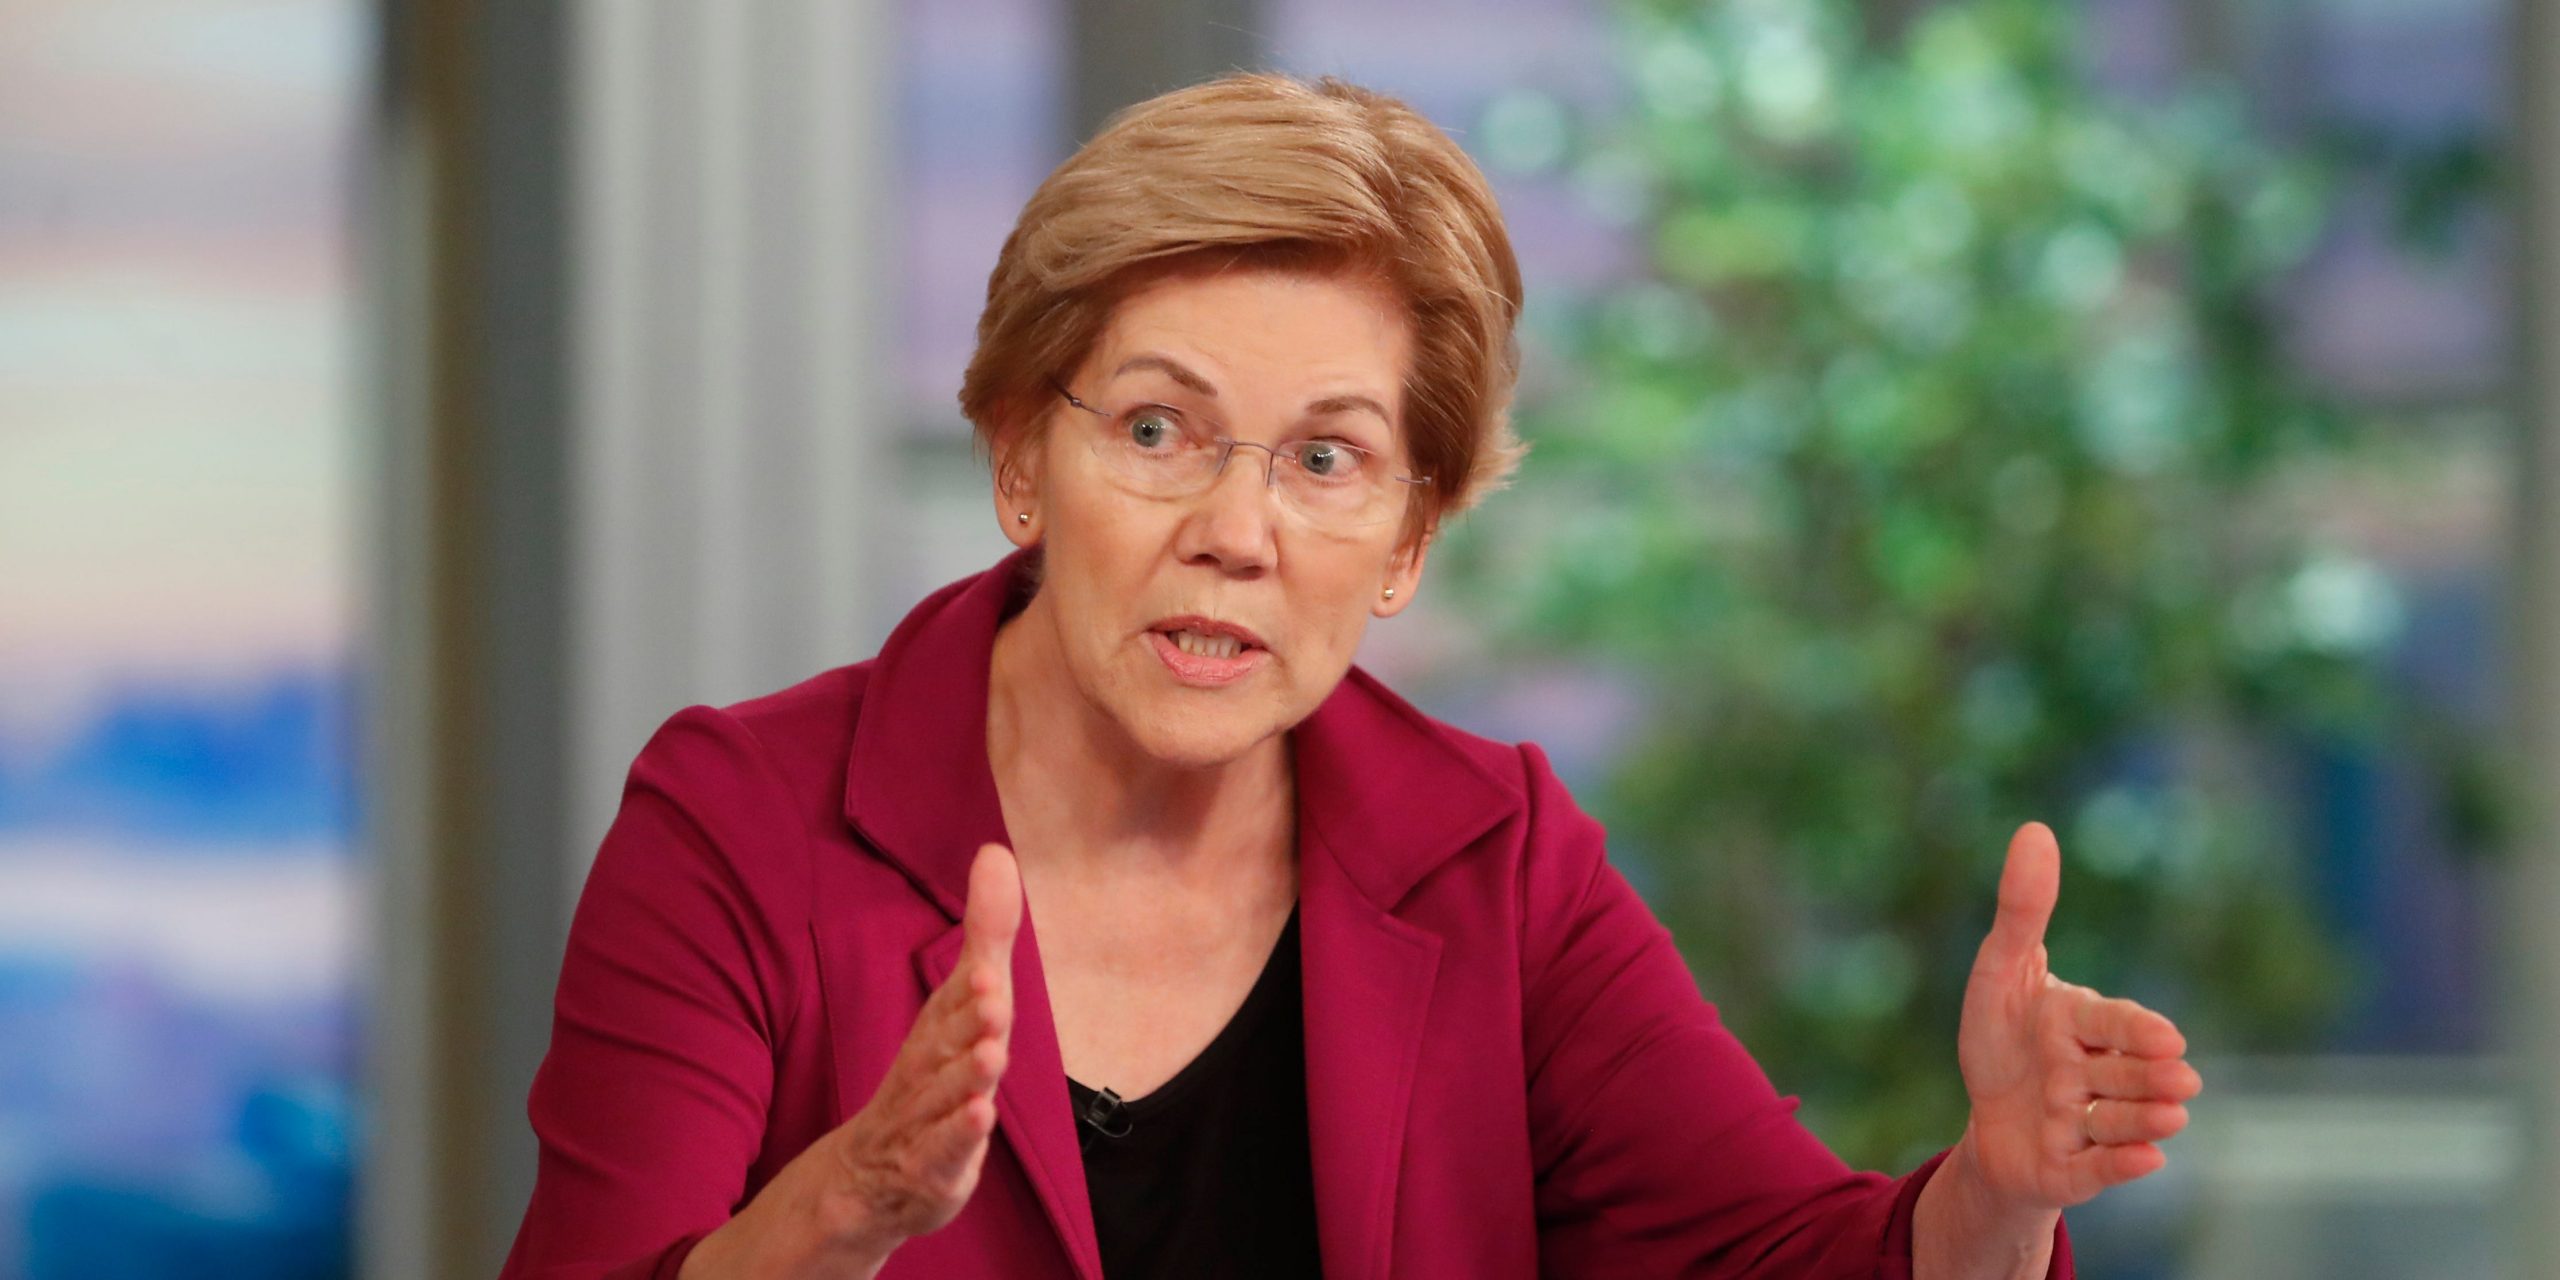 Elizabeth Warren as the guest on The View on ABC, October 12, 2021